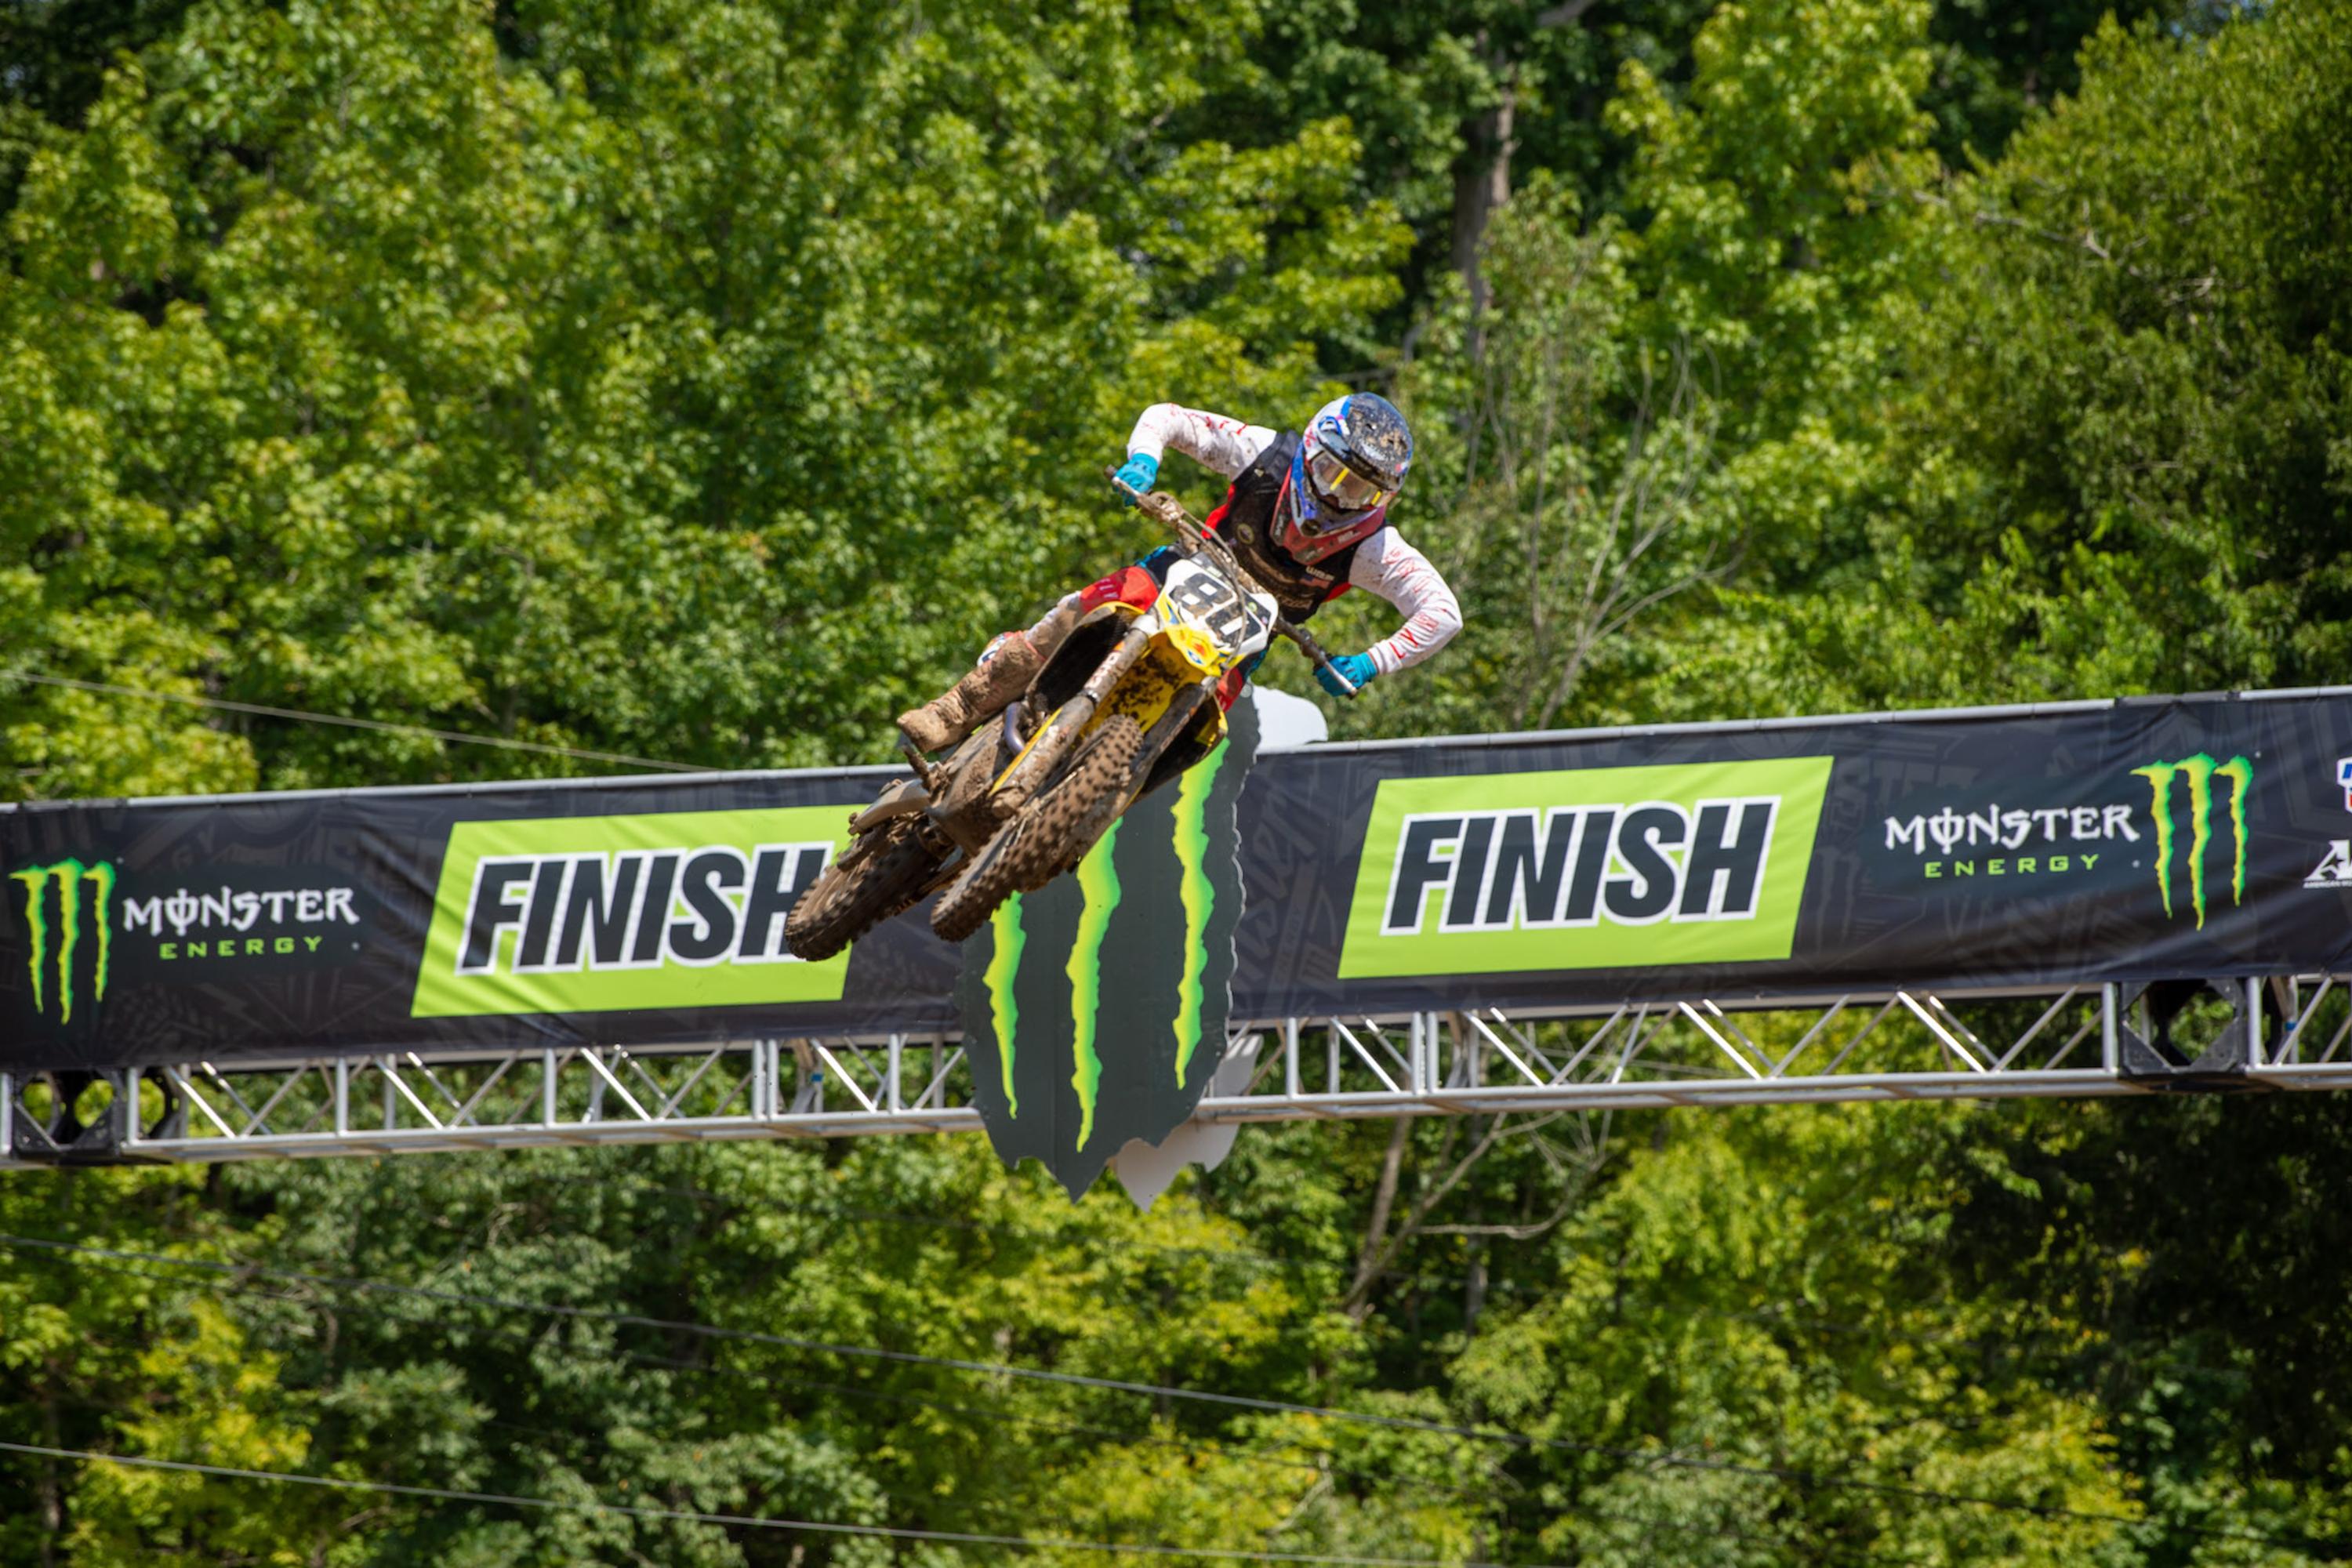 Racing for 40th Running of Monster Energy AMA Amateur National Motocross Championship Gets Underway with Opening Motos